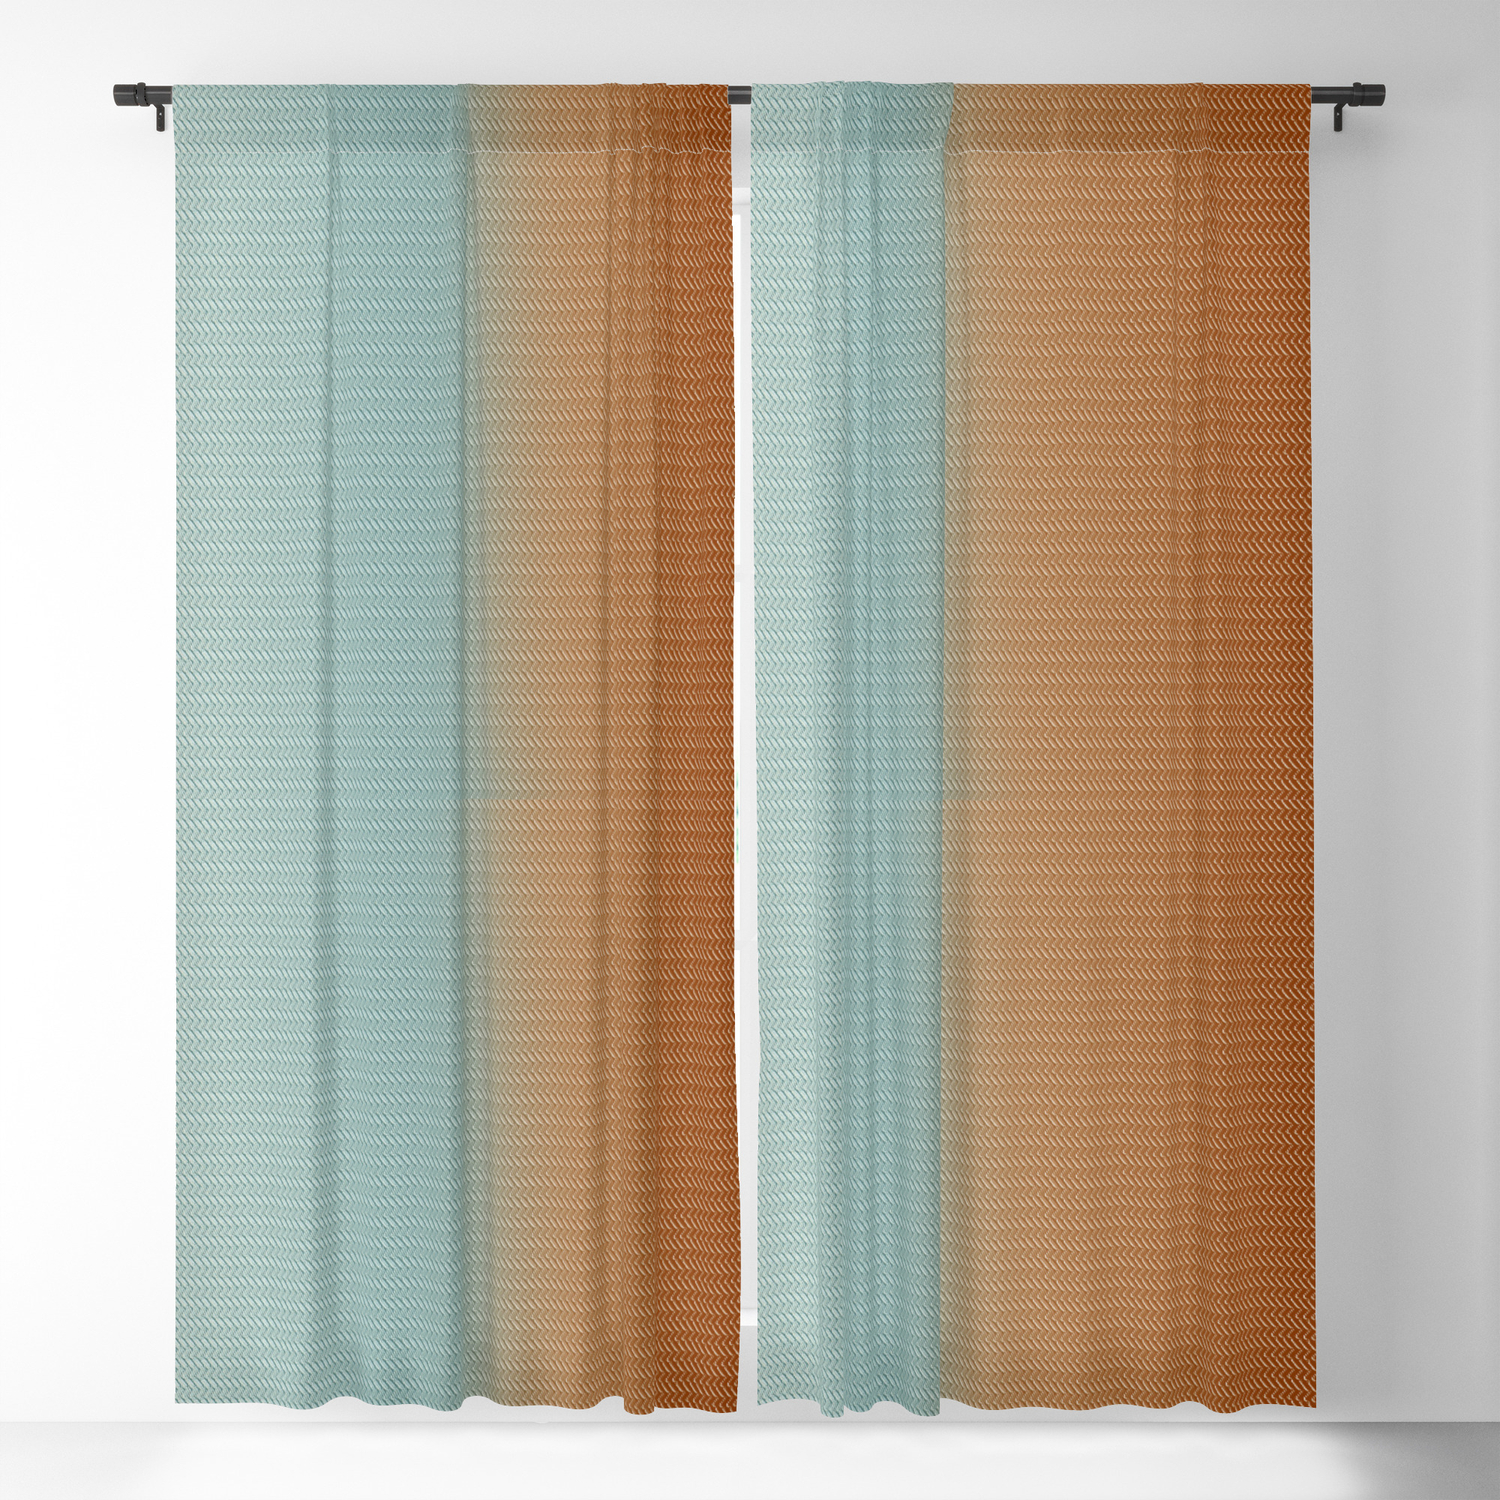 Light Rust And Turquoise Graphic Herringbone Weave Pattern Blackout Curtain By Natural Design Society6